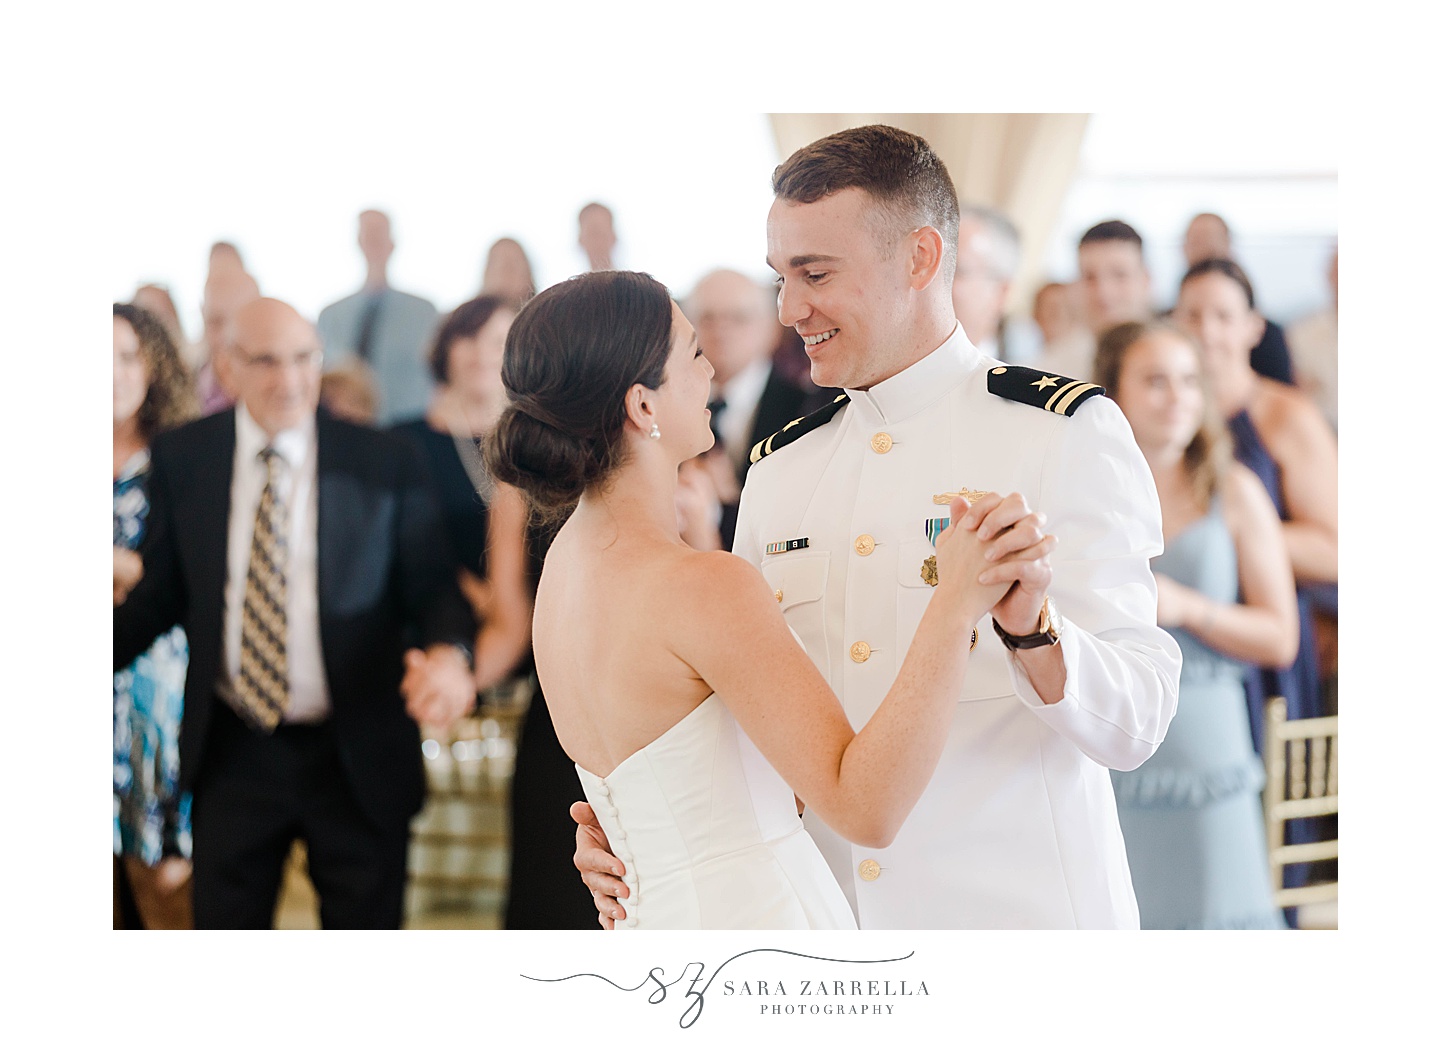 bride and groom dance together at Regatta Place wedding reception